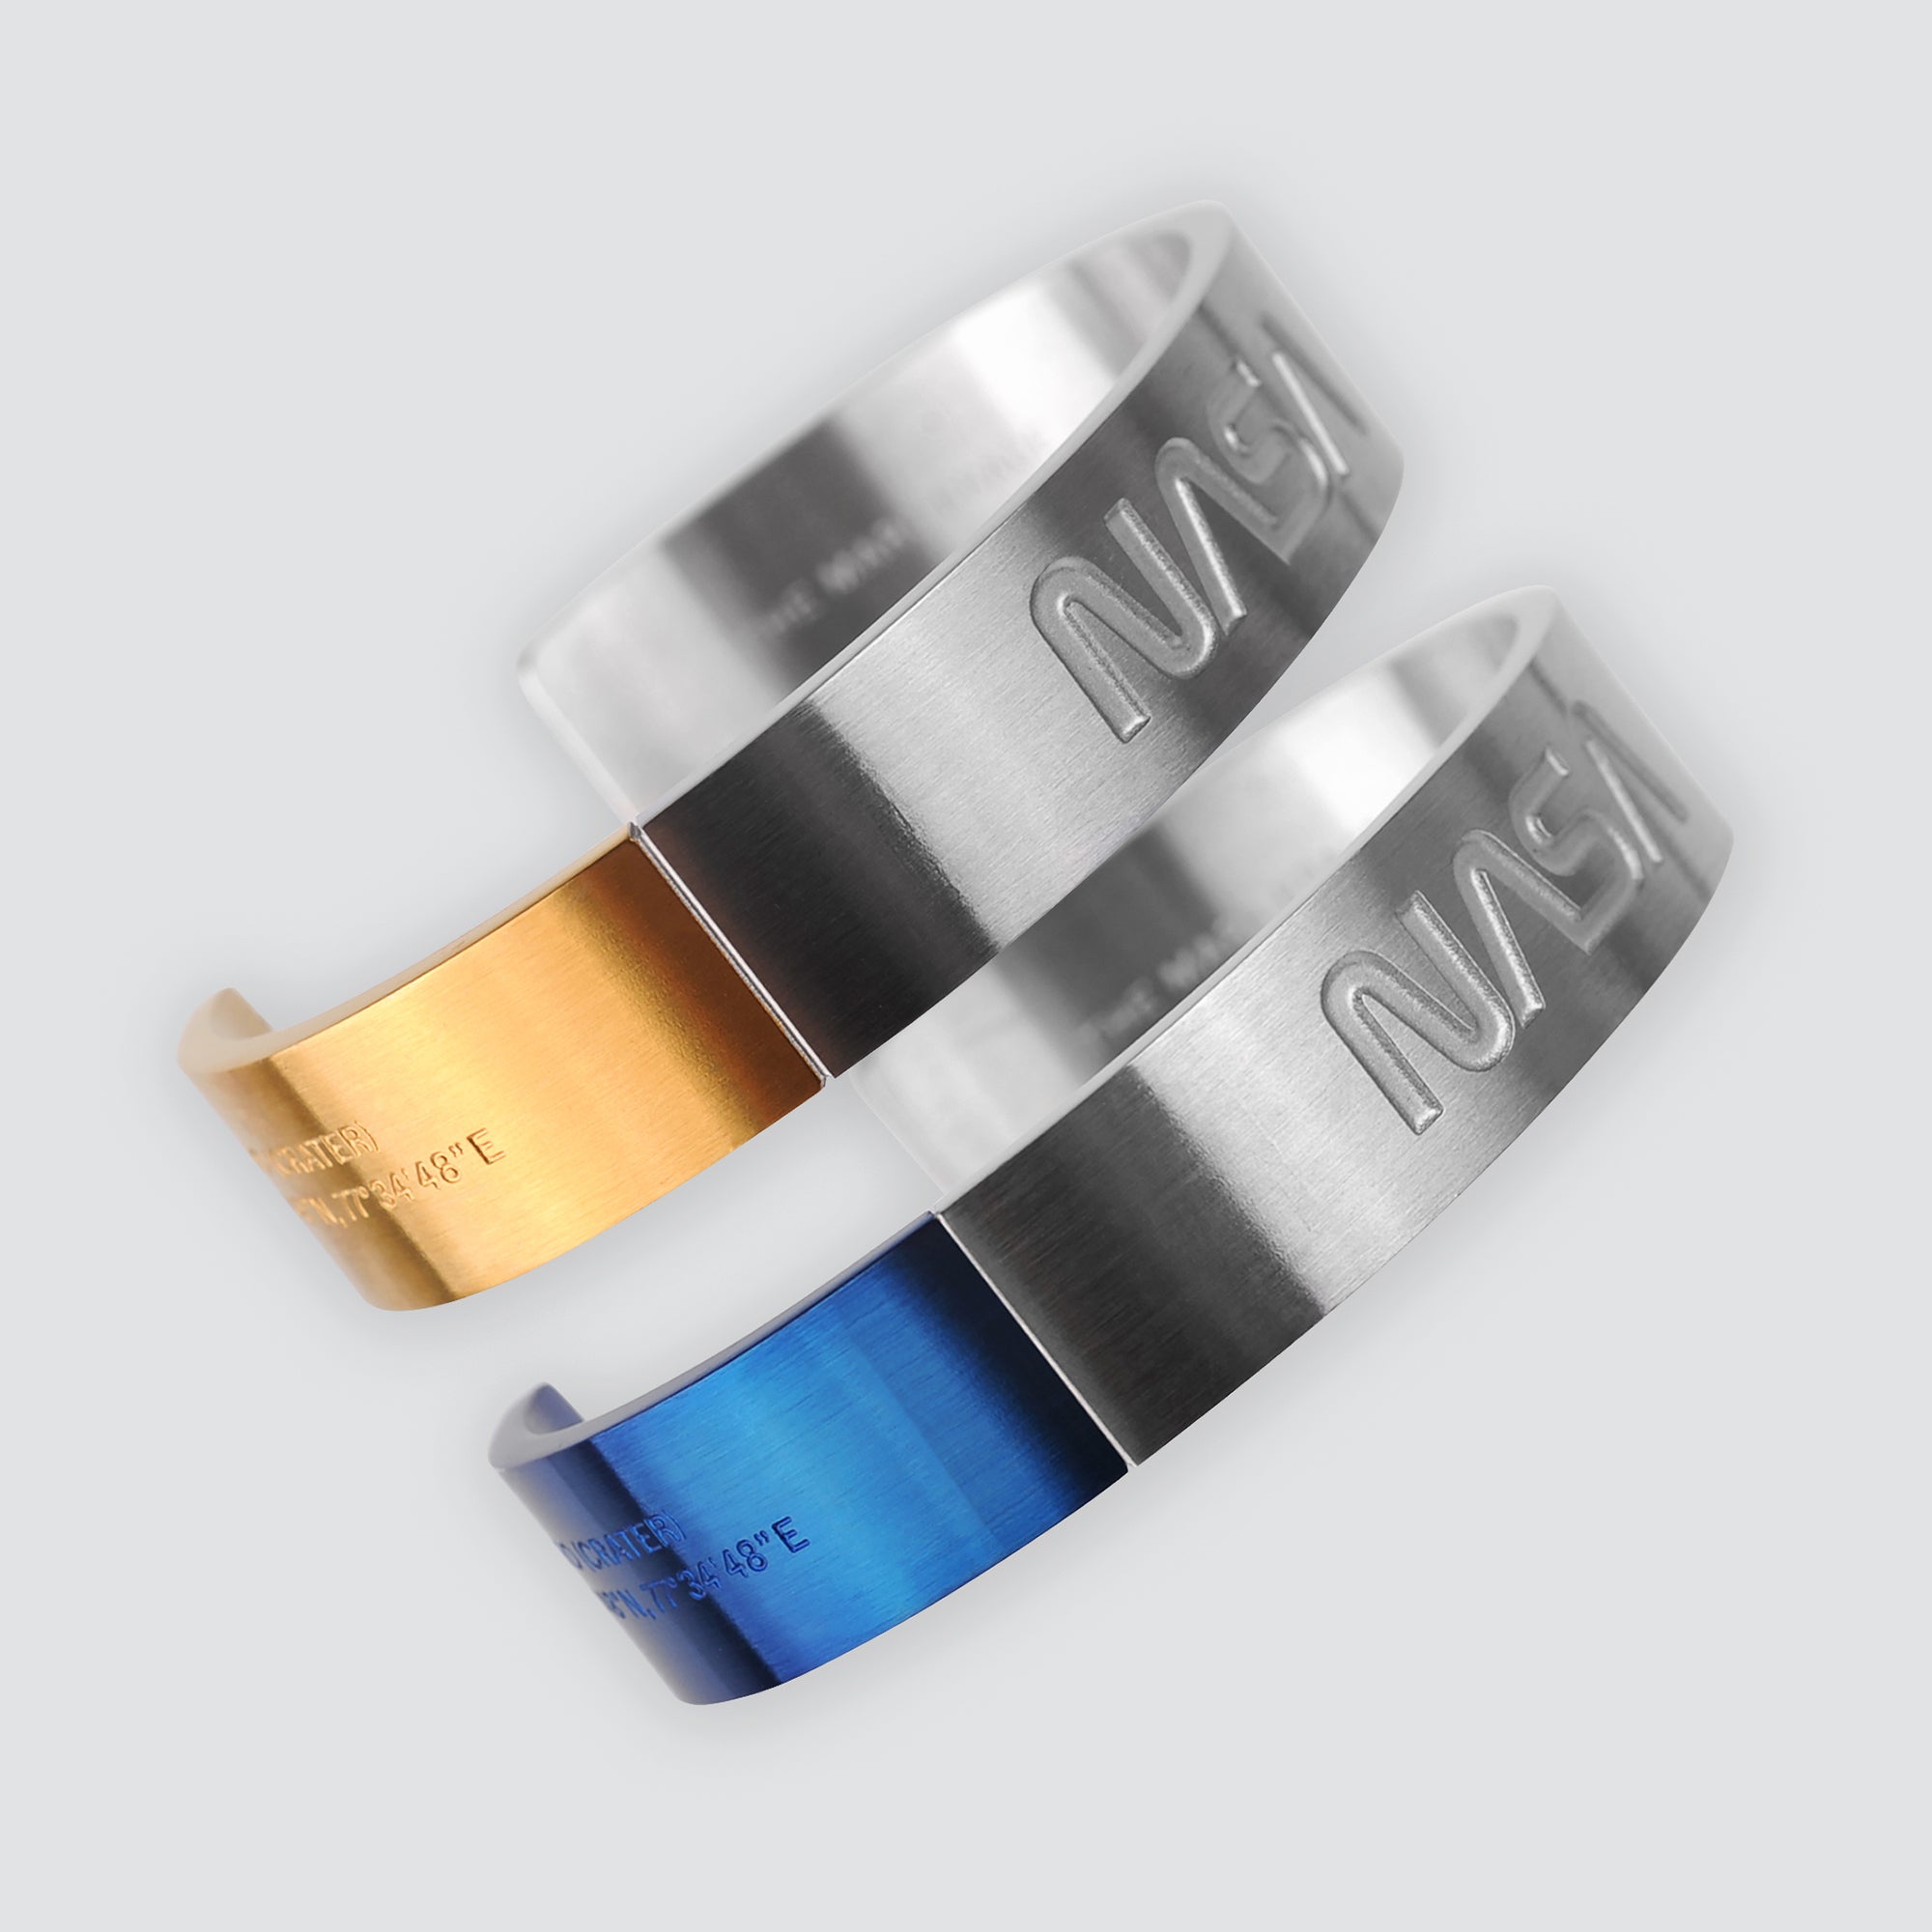 Futuristic elegance. A slip-on gold/silver or blue/silver duo-colored stainless steel bracelet with the landing coordinates and NASA logo embossed. A collaboration with Shannnam.